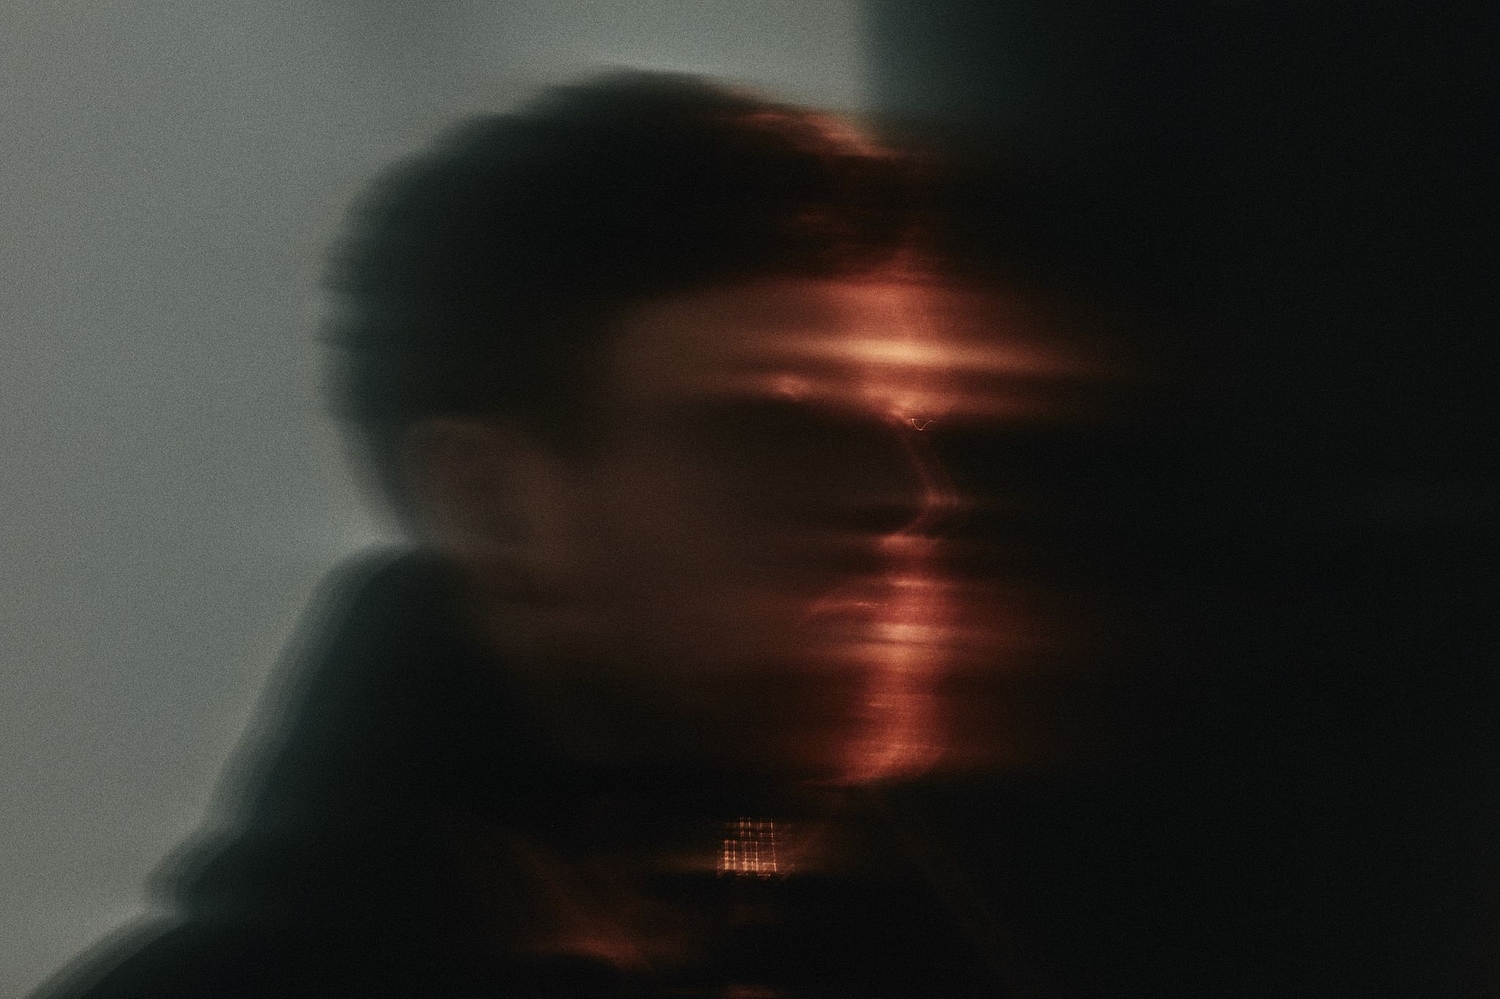 James Blake on new album 'Playing Robots Into Heaven' and rediscovering the dancefloor